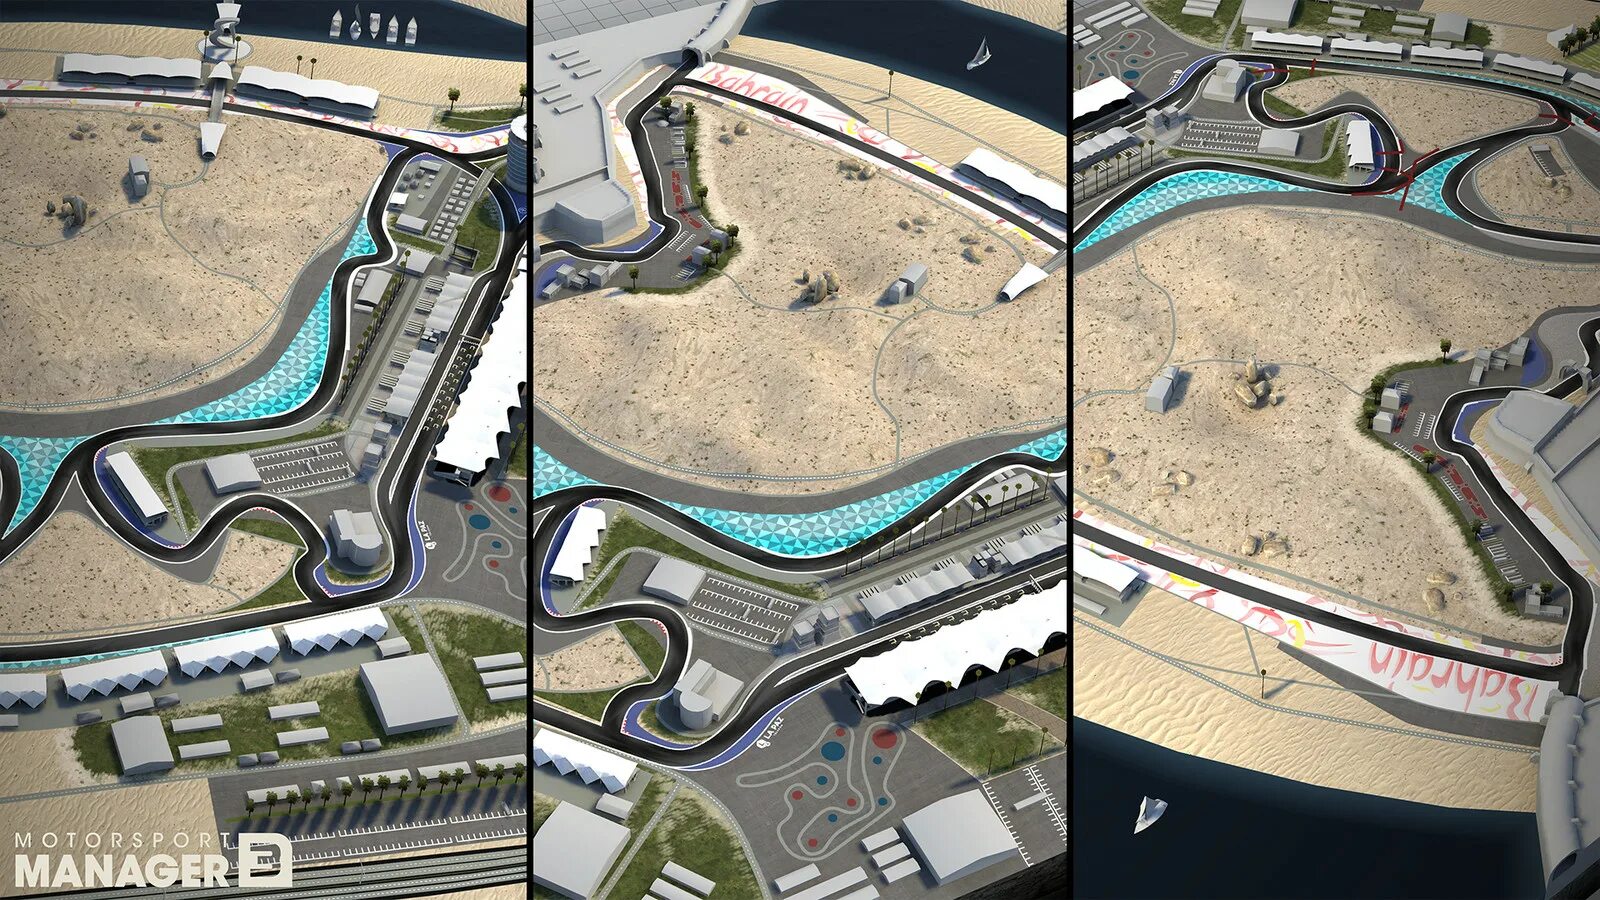 Dubai is a track in Motorsport Manager.